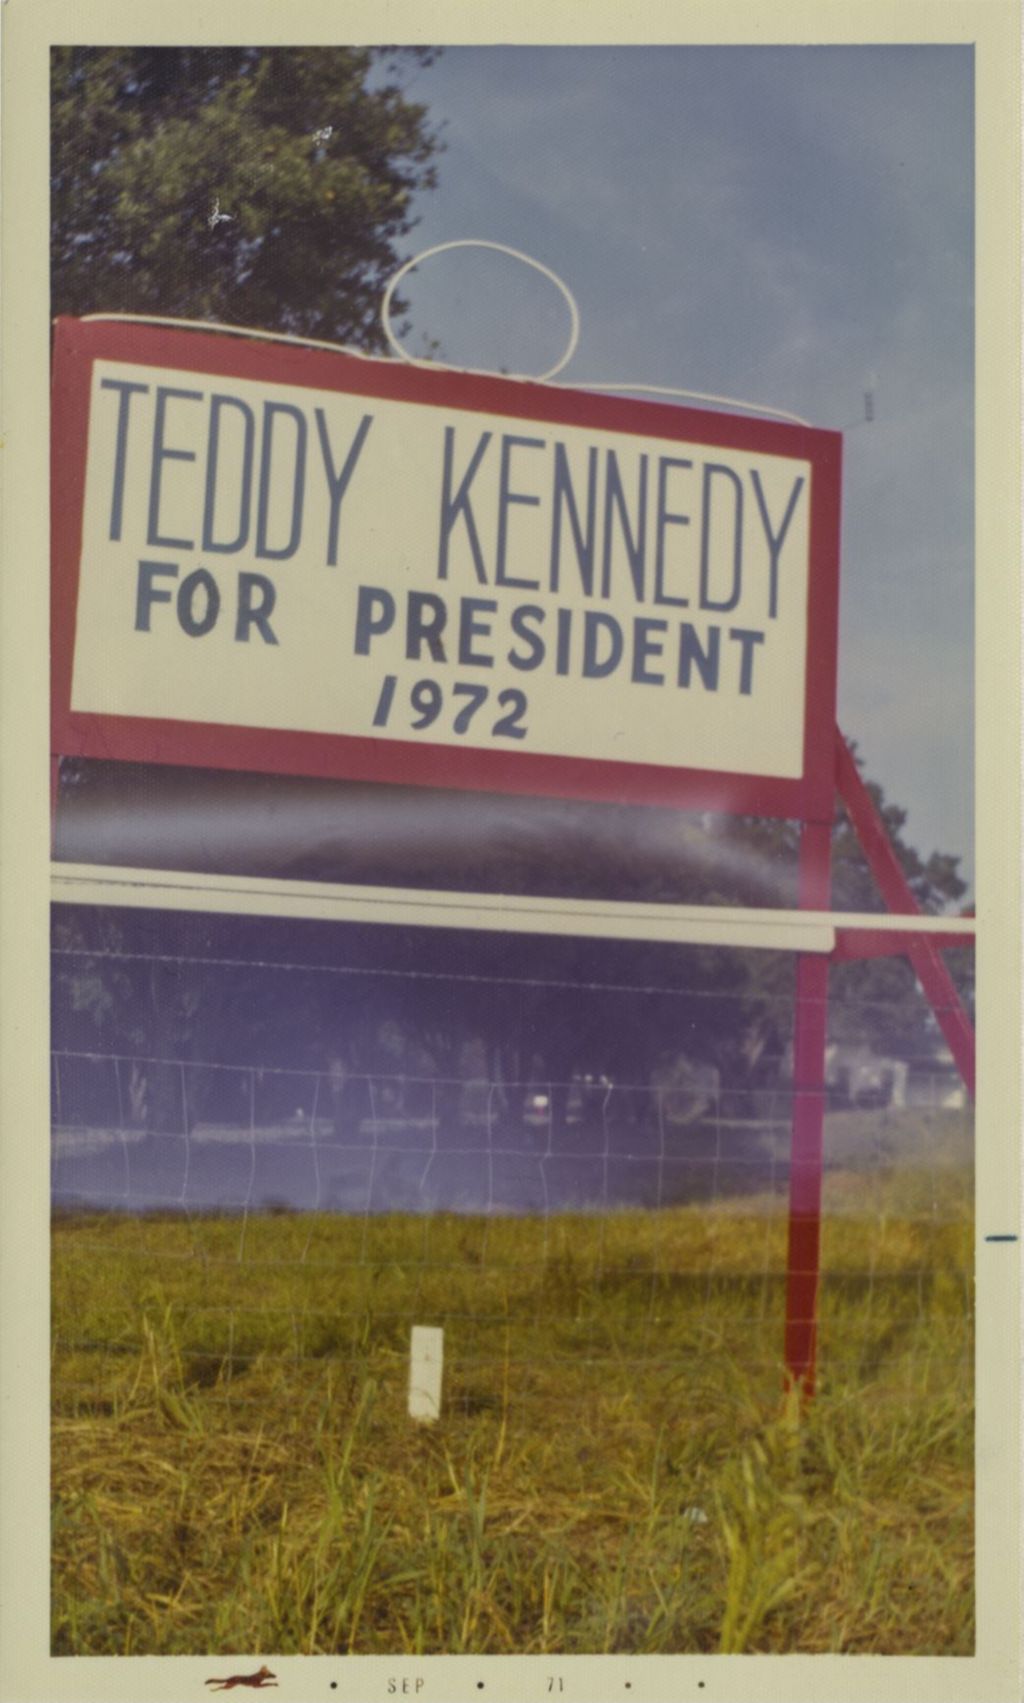 Miniature of Teddy Kennedy campaign sign